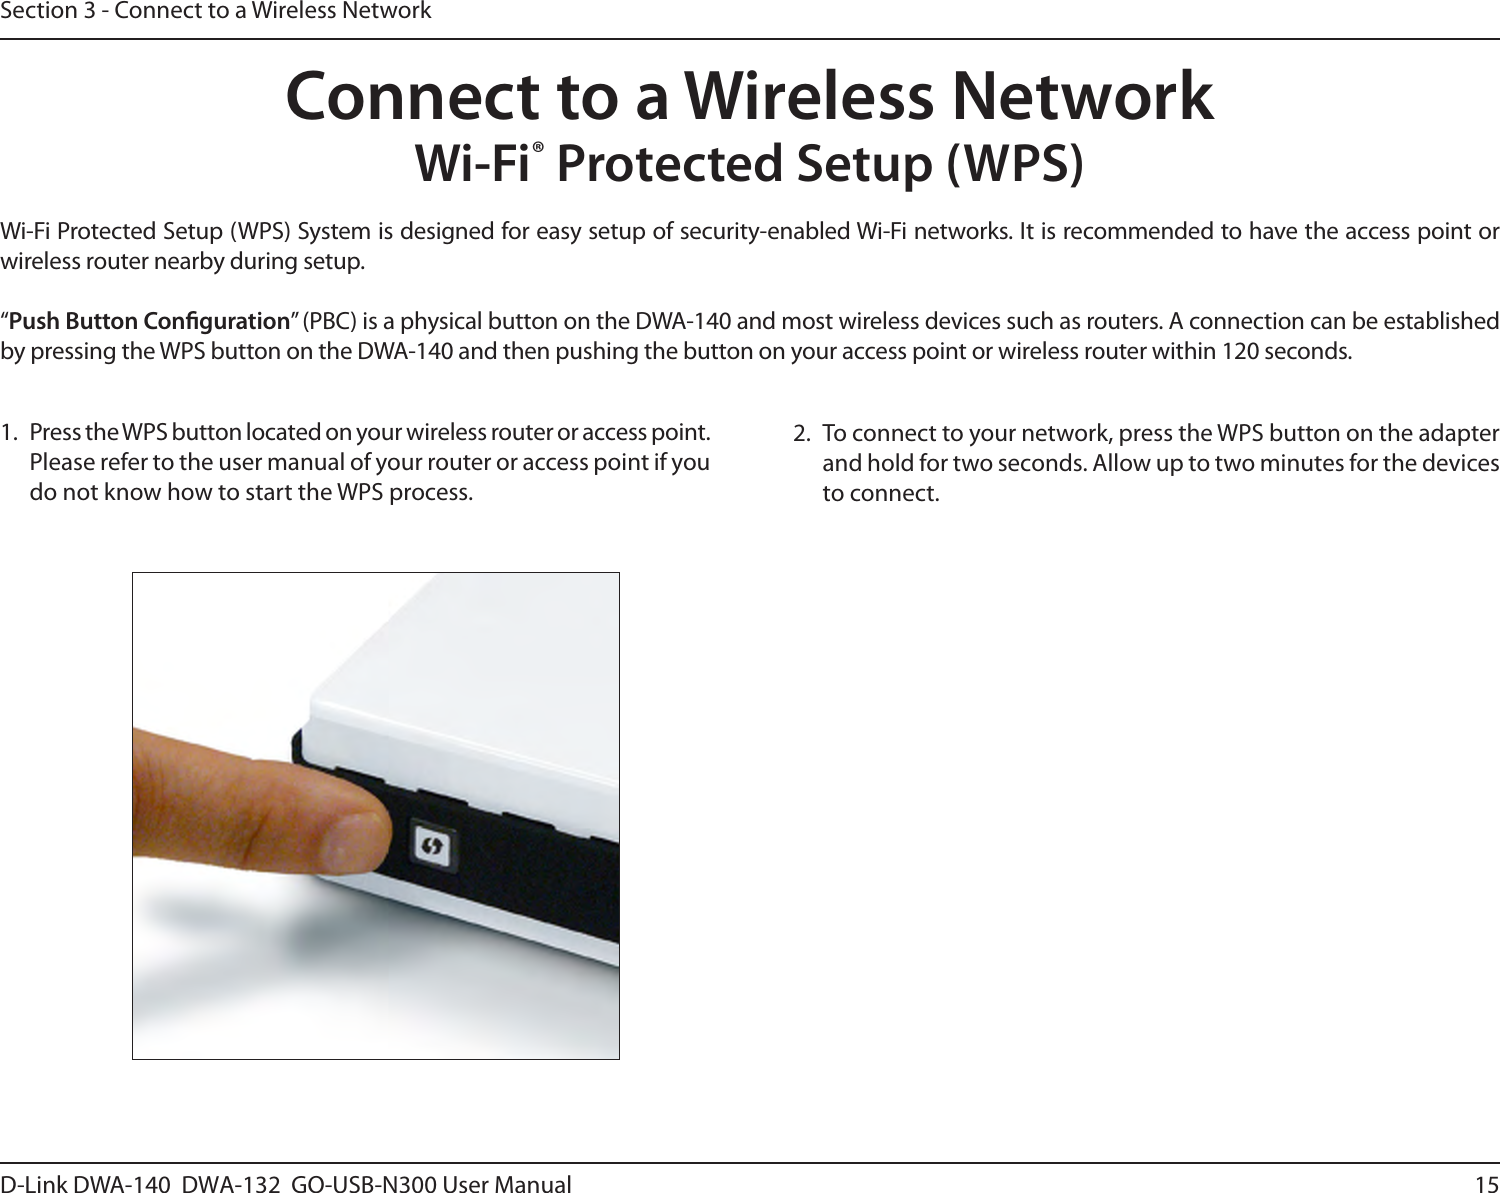 15D-Link DWA-140  DWA-132  GO-USB-N300 User M anualSection 3 - Connect to a Wireless NetworkWi-Fi® Protected Setup (WPS)Wi-Fi Protected Setup (WPS) System is designed for easy setup of security-enabled Wi-Fi networks. It is recommended to have the access point or wireless router nearby during setup. “Push Button Conguration” (PBC) is a physical button on the DWA-140 and most wireless devices such as routers. A connection can be established by pressing the WPS button on the DWA-140 and then pushing the button on your access point or wireless router within 120 seconds. Connect to a Wireless Network2.  To connect to your network, press the WPS button on the adapter and hold for two seconds. Allow up to two minutes for the devices to connect.1.  Press the WPS button located on your wireless router or access point. Please refer to the user manual of your router or access point if you do not know how to start the WPS process.